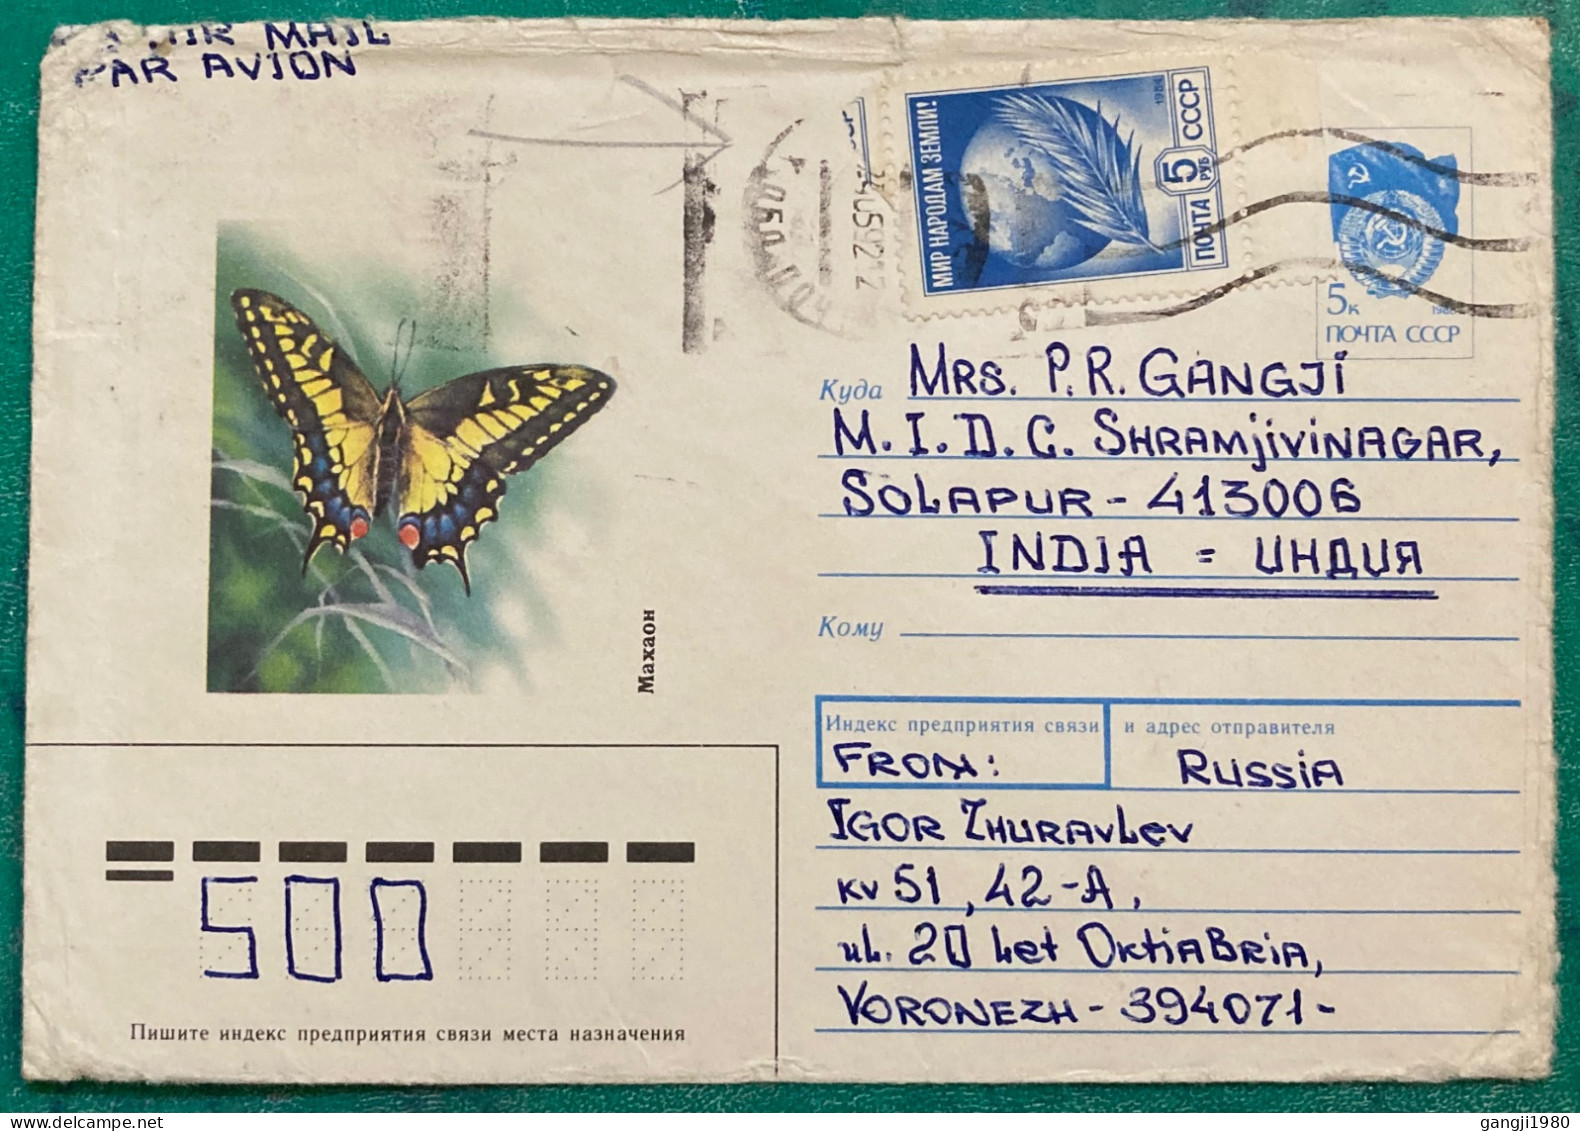 RUSSIA TO INDIA COVER USED 1992, STATIONERY COVER, ILLUSTRATE, BUTTERFLY,  GLOBE & FEATHER, COAT OF ARM FLAG, KORONEZ CI - Briefe U. Dokumente